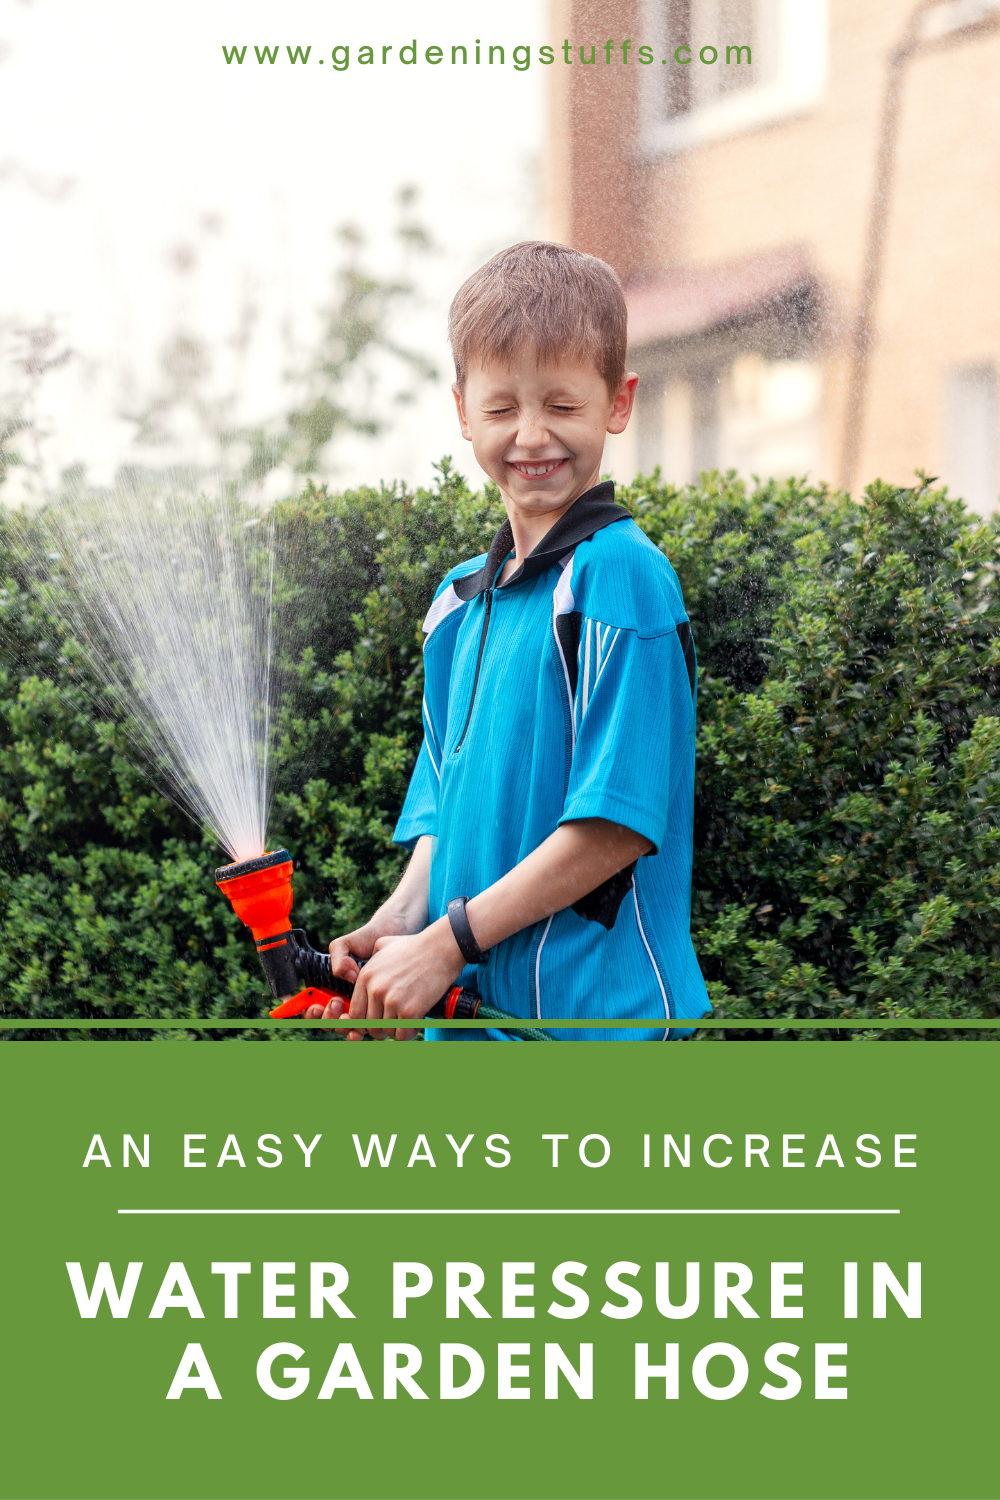 If you are not really happy with the pressure that you get at the end of a garden hose. Check out this article, we have listed the steps to increase the water pressure in your garden hose. These steps are quick and easy to follow and you would not have to make additional investments either.